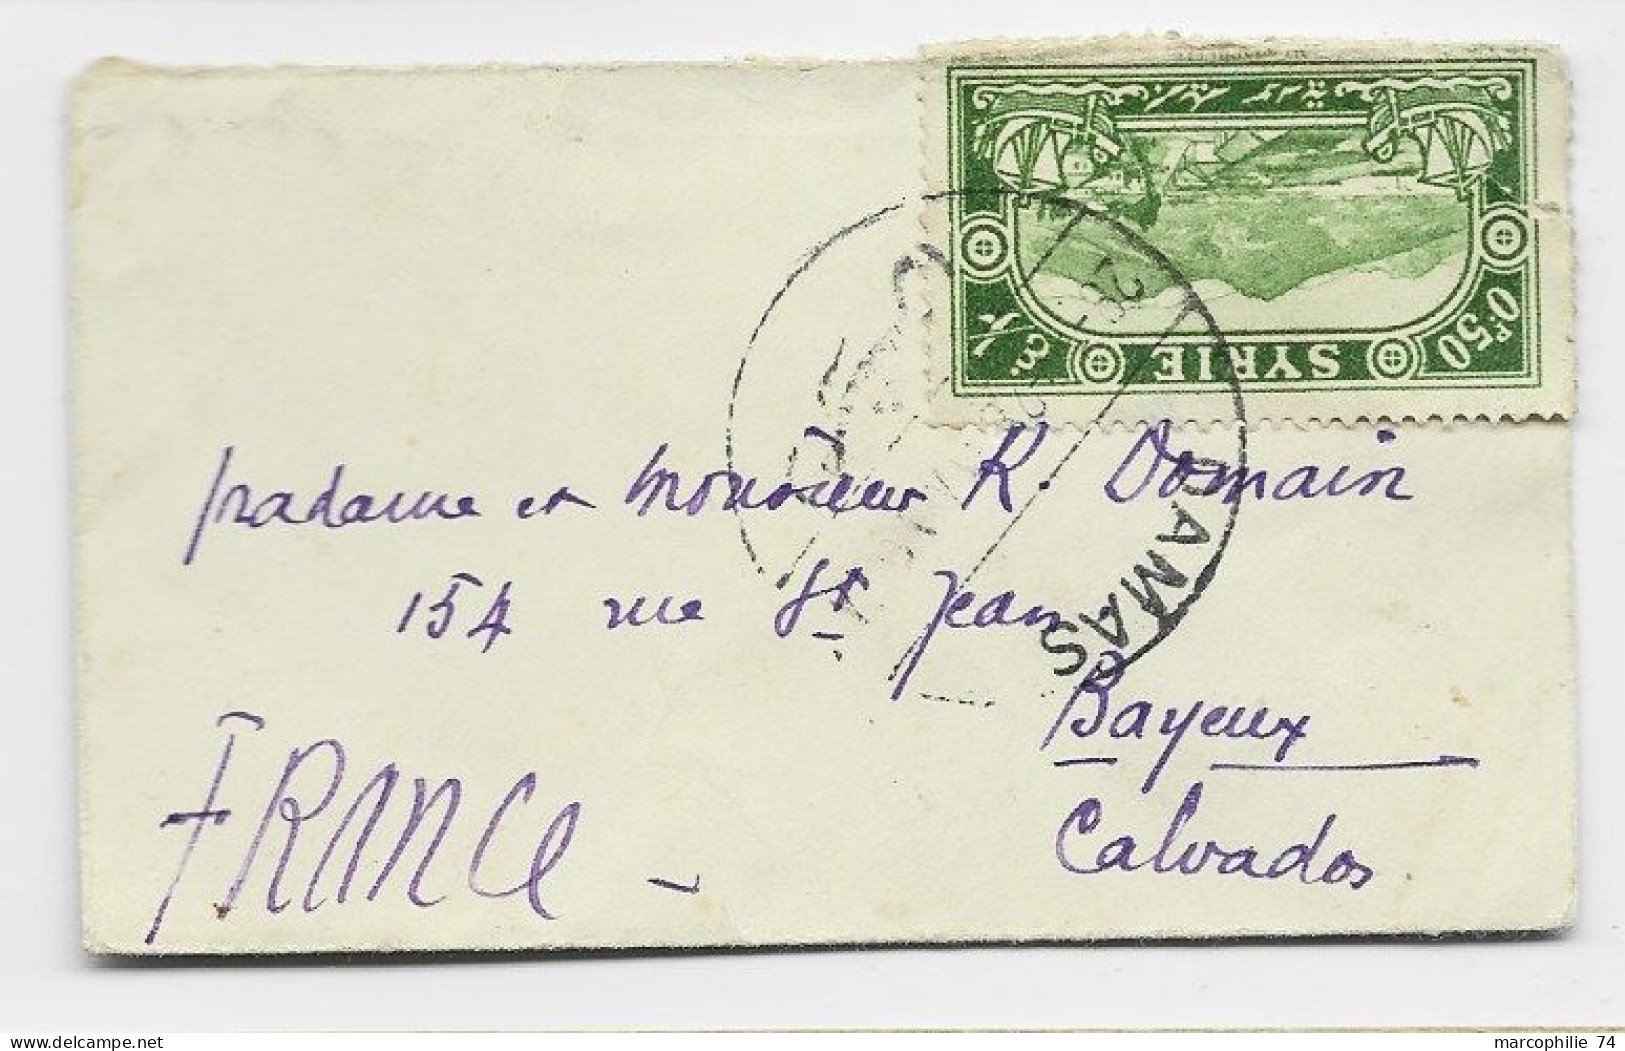 SYRIA SYRIE 2P+1P+0P50 AU VERSO MIGNONNETTE SMALL COVER + RECTO 0.P50 DAMAS 1928 TO FRANCE - Lettres & Documents